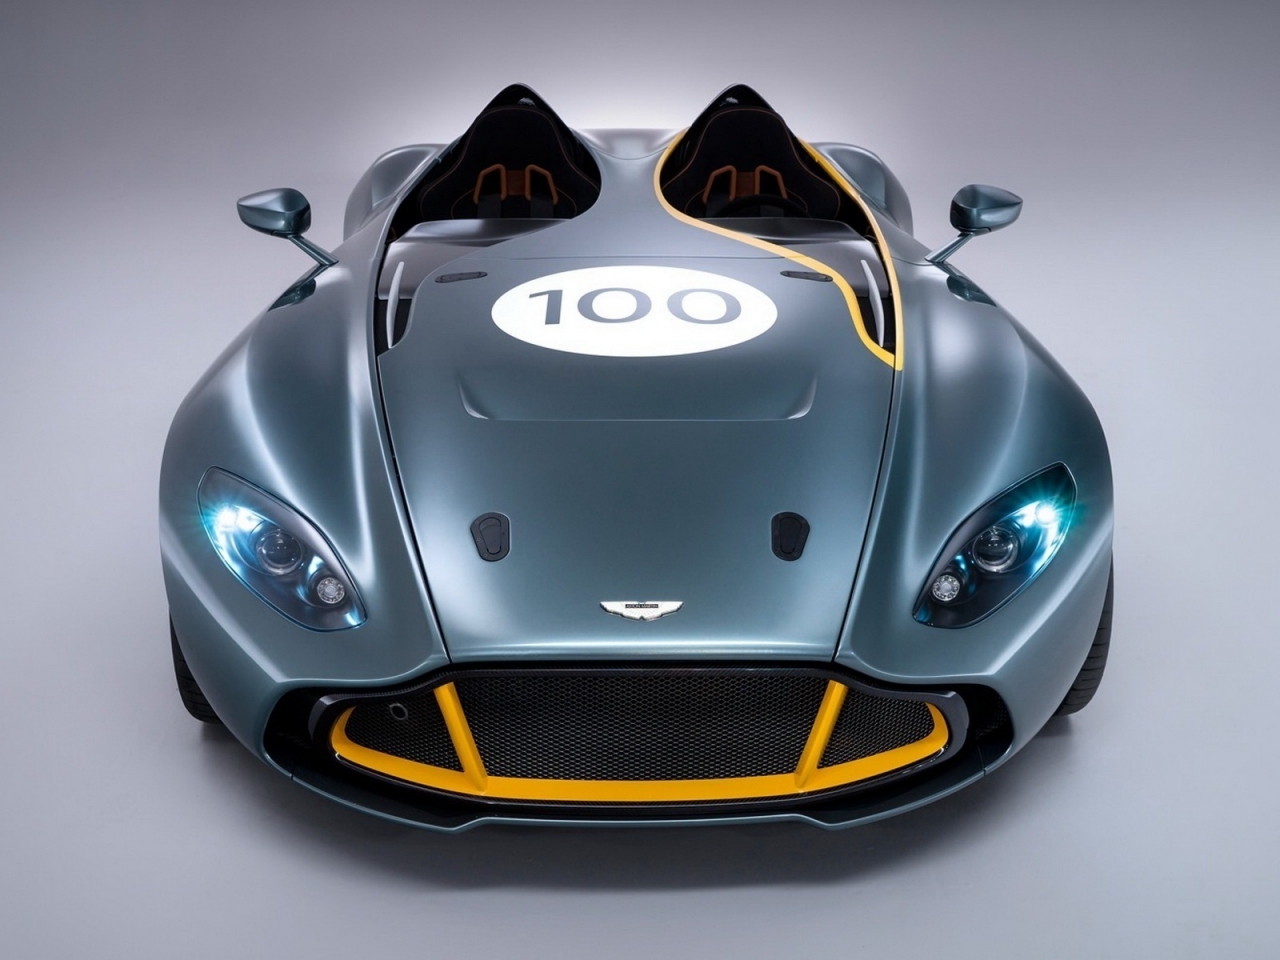 Aston Martin CC100 Speedster Front View for 1280 x 960 resolution